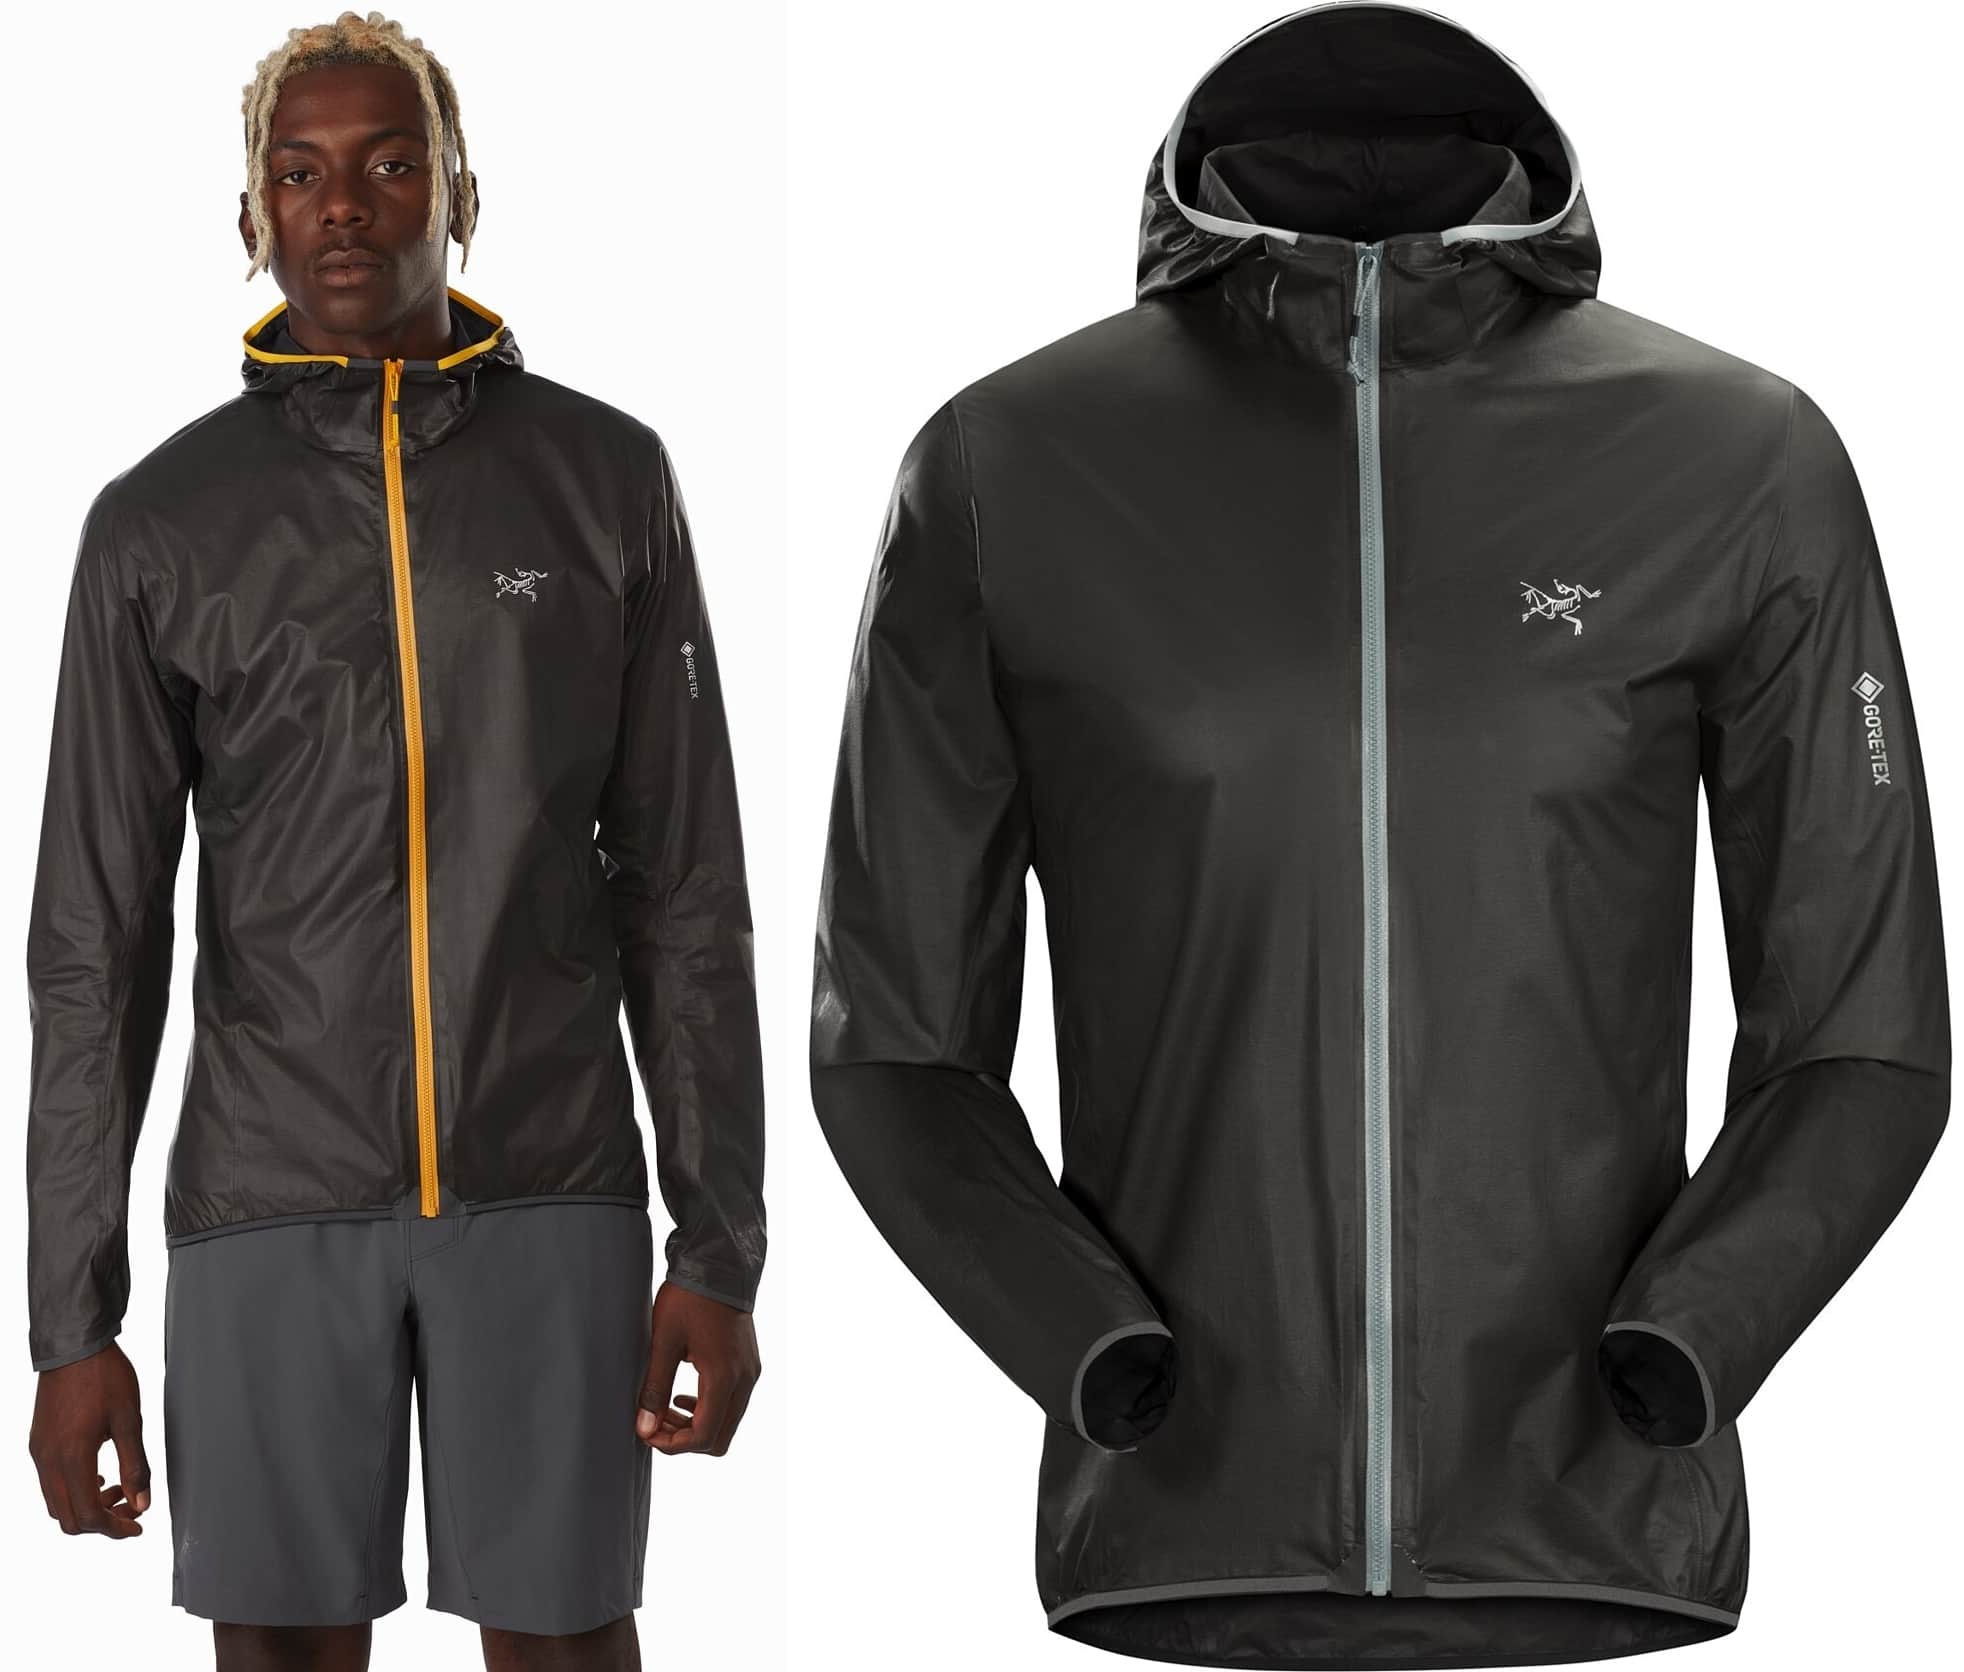 The lightest, most breathable Arc’teryx GORE-TEX trail running jacket